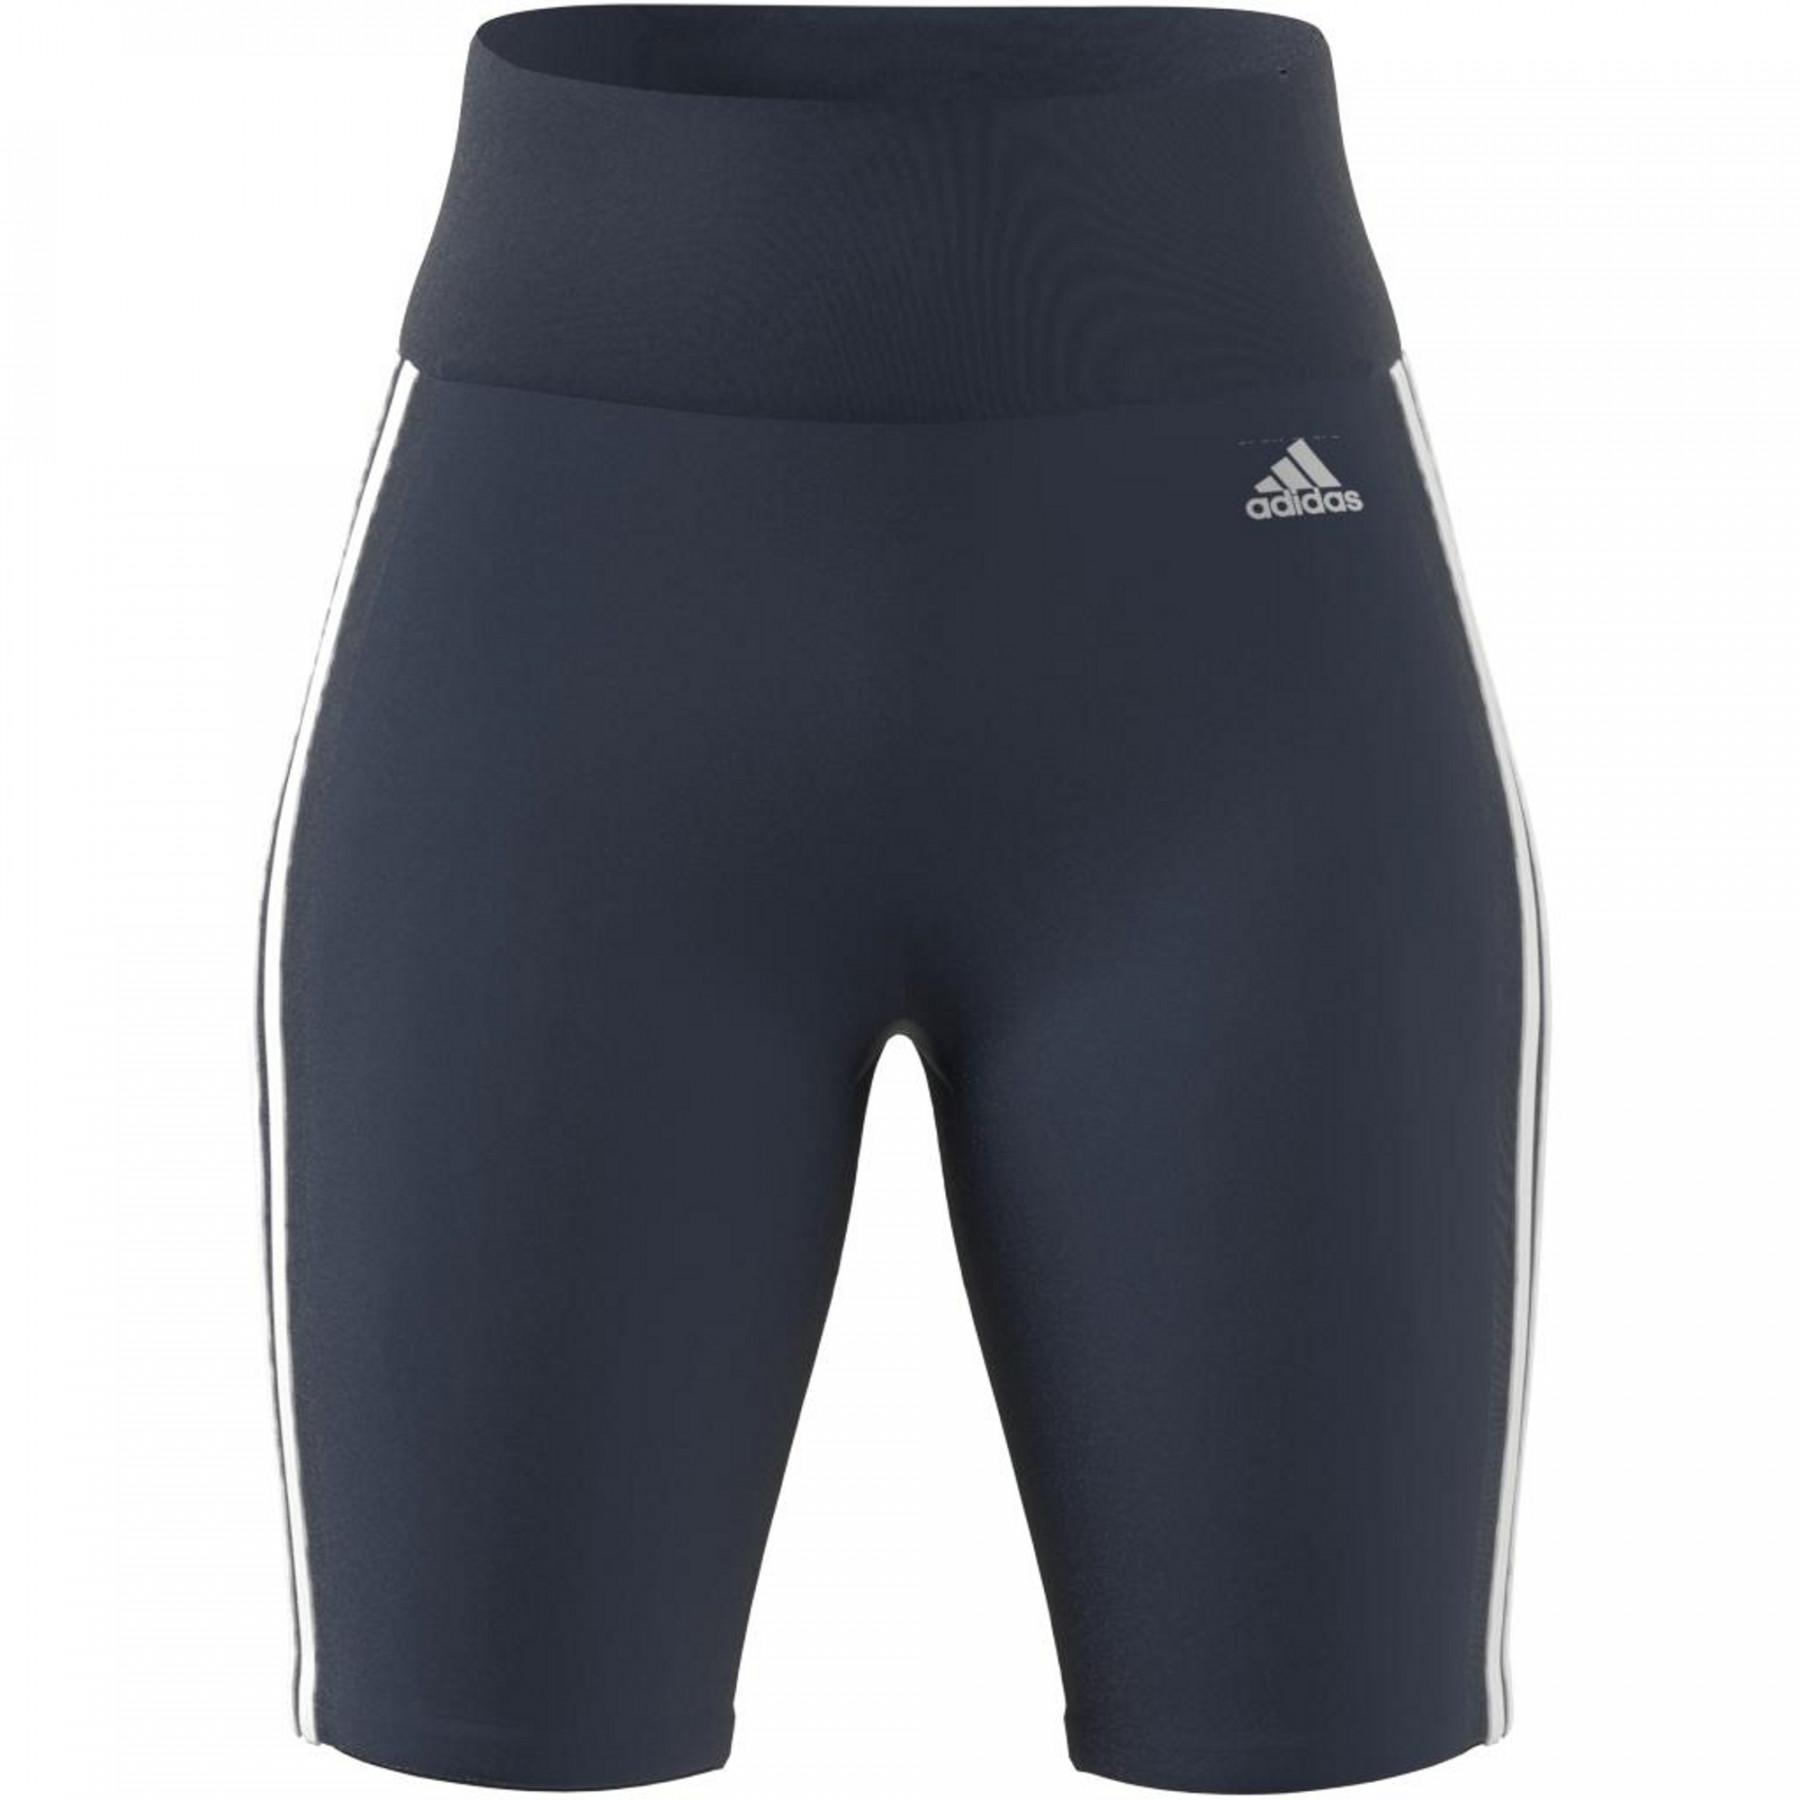 Mujer ciclista adidas Designed To Move High-Riseport